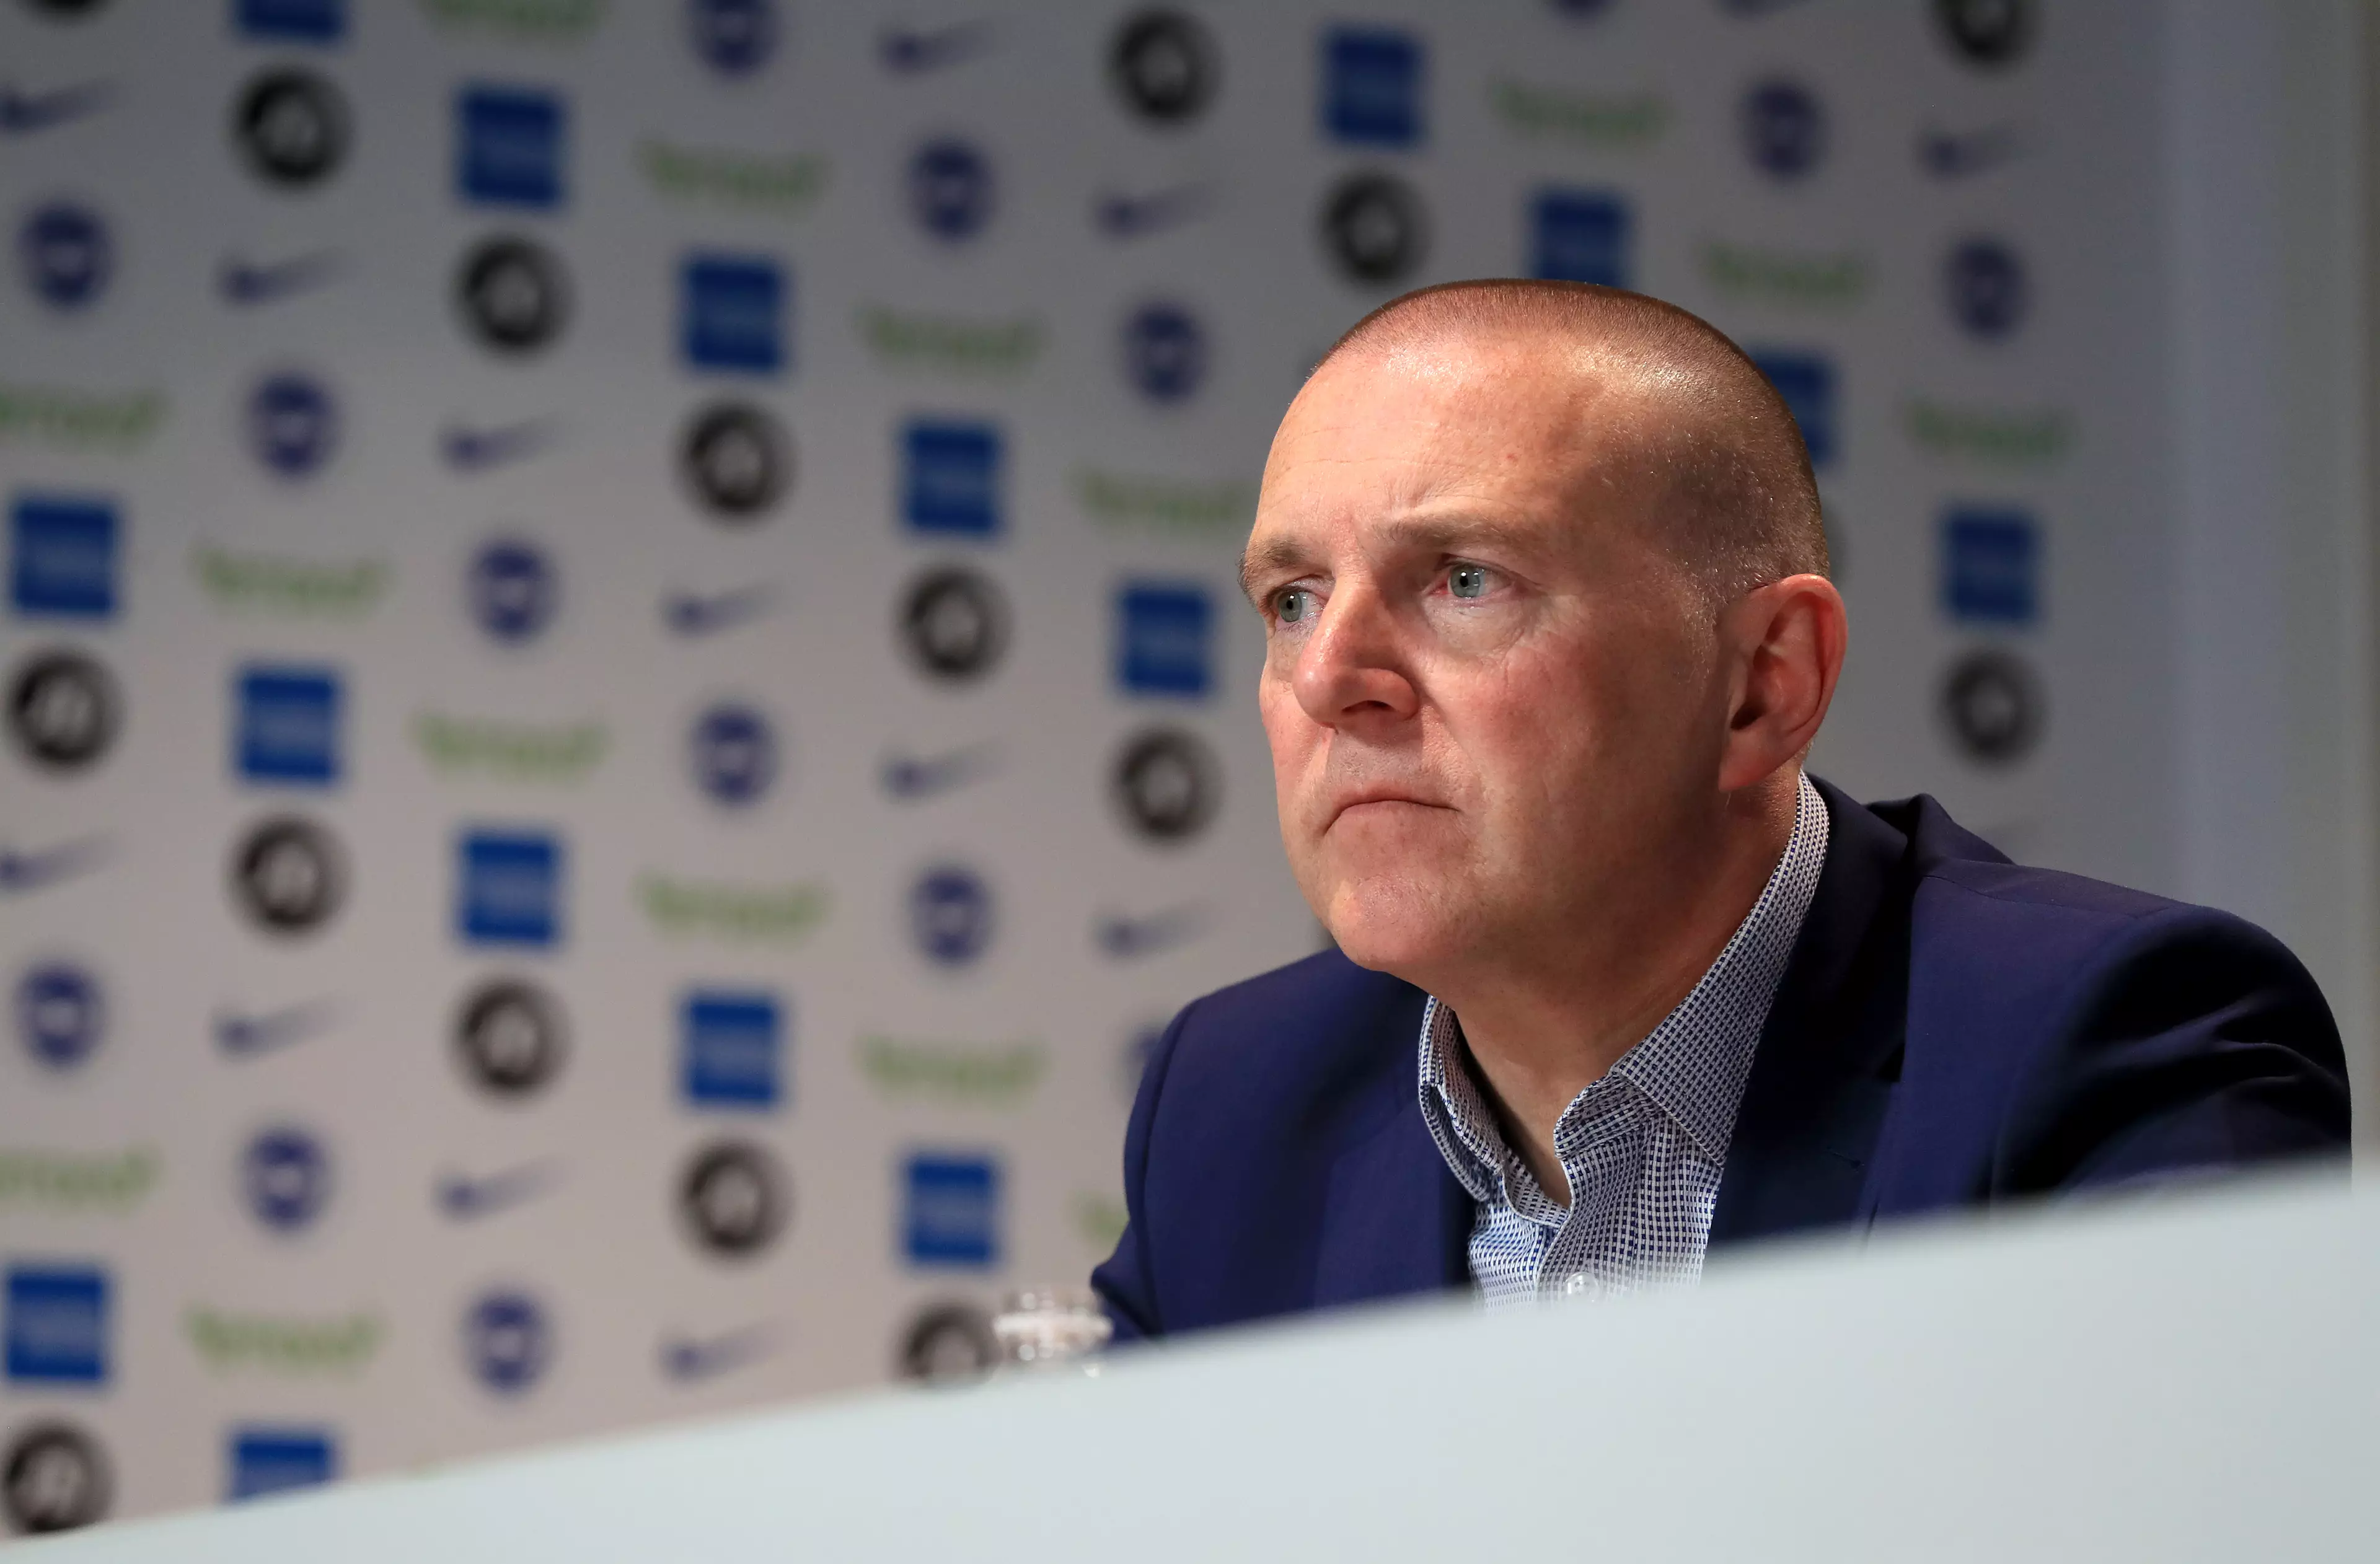 Brighton chief executive Paul Barber has campaigned against the season being finished at neutral grounds. (Image